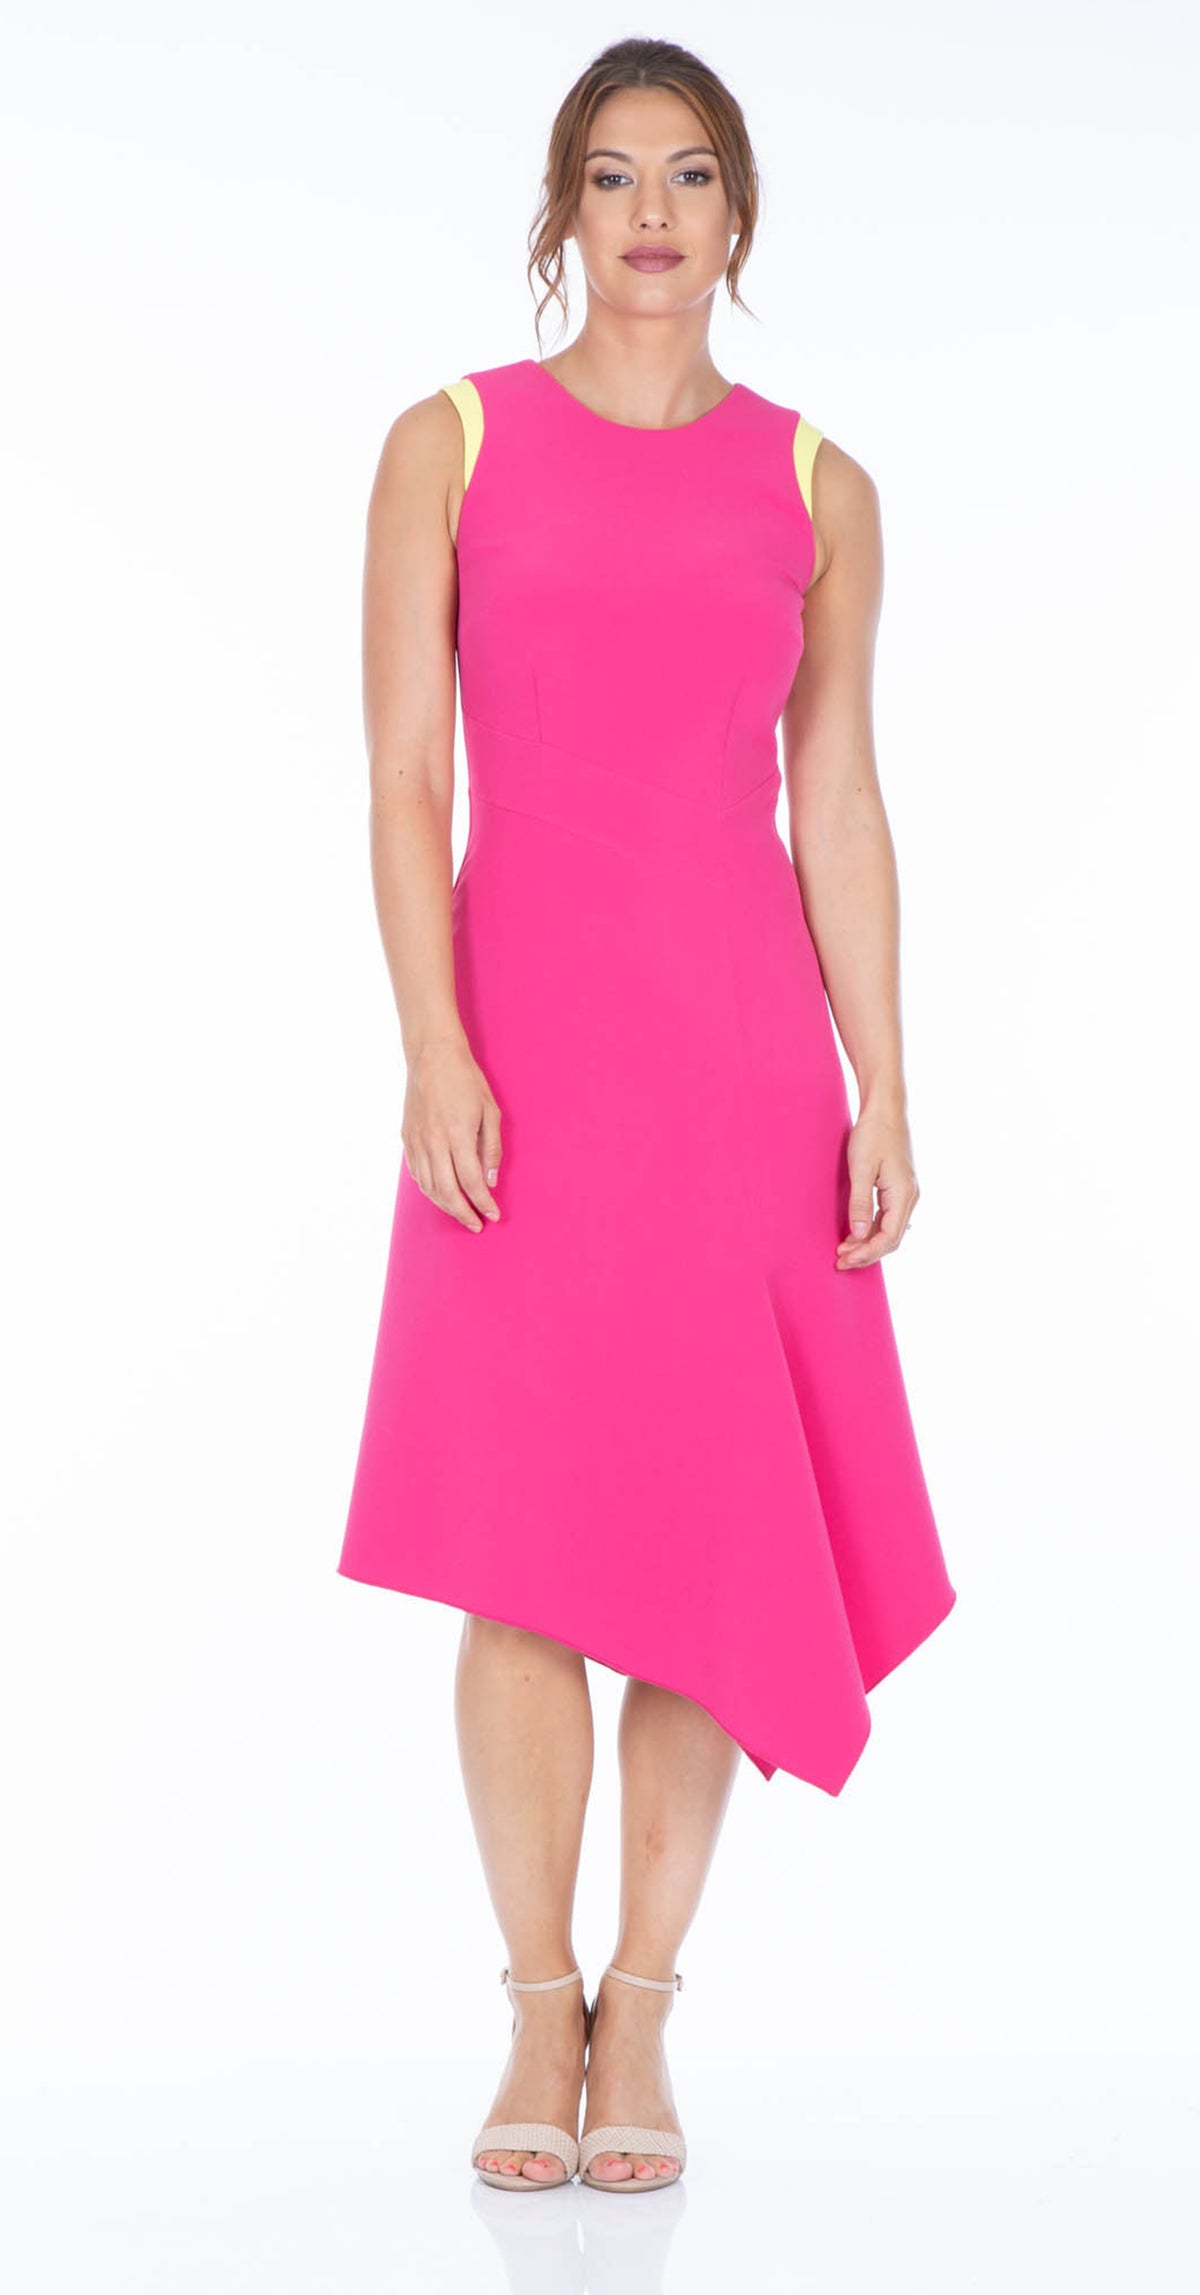 Adelle Dress DRC236 Pink crepe with yellow contrast